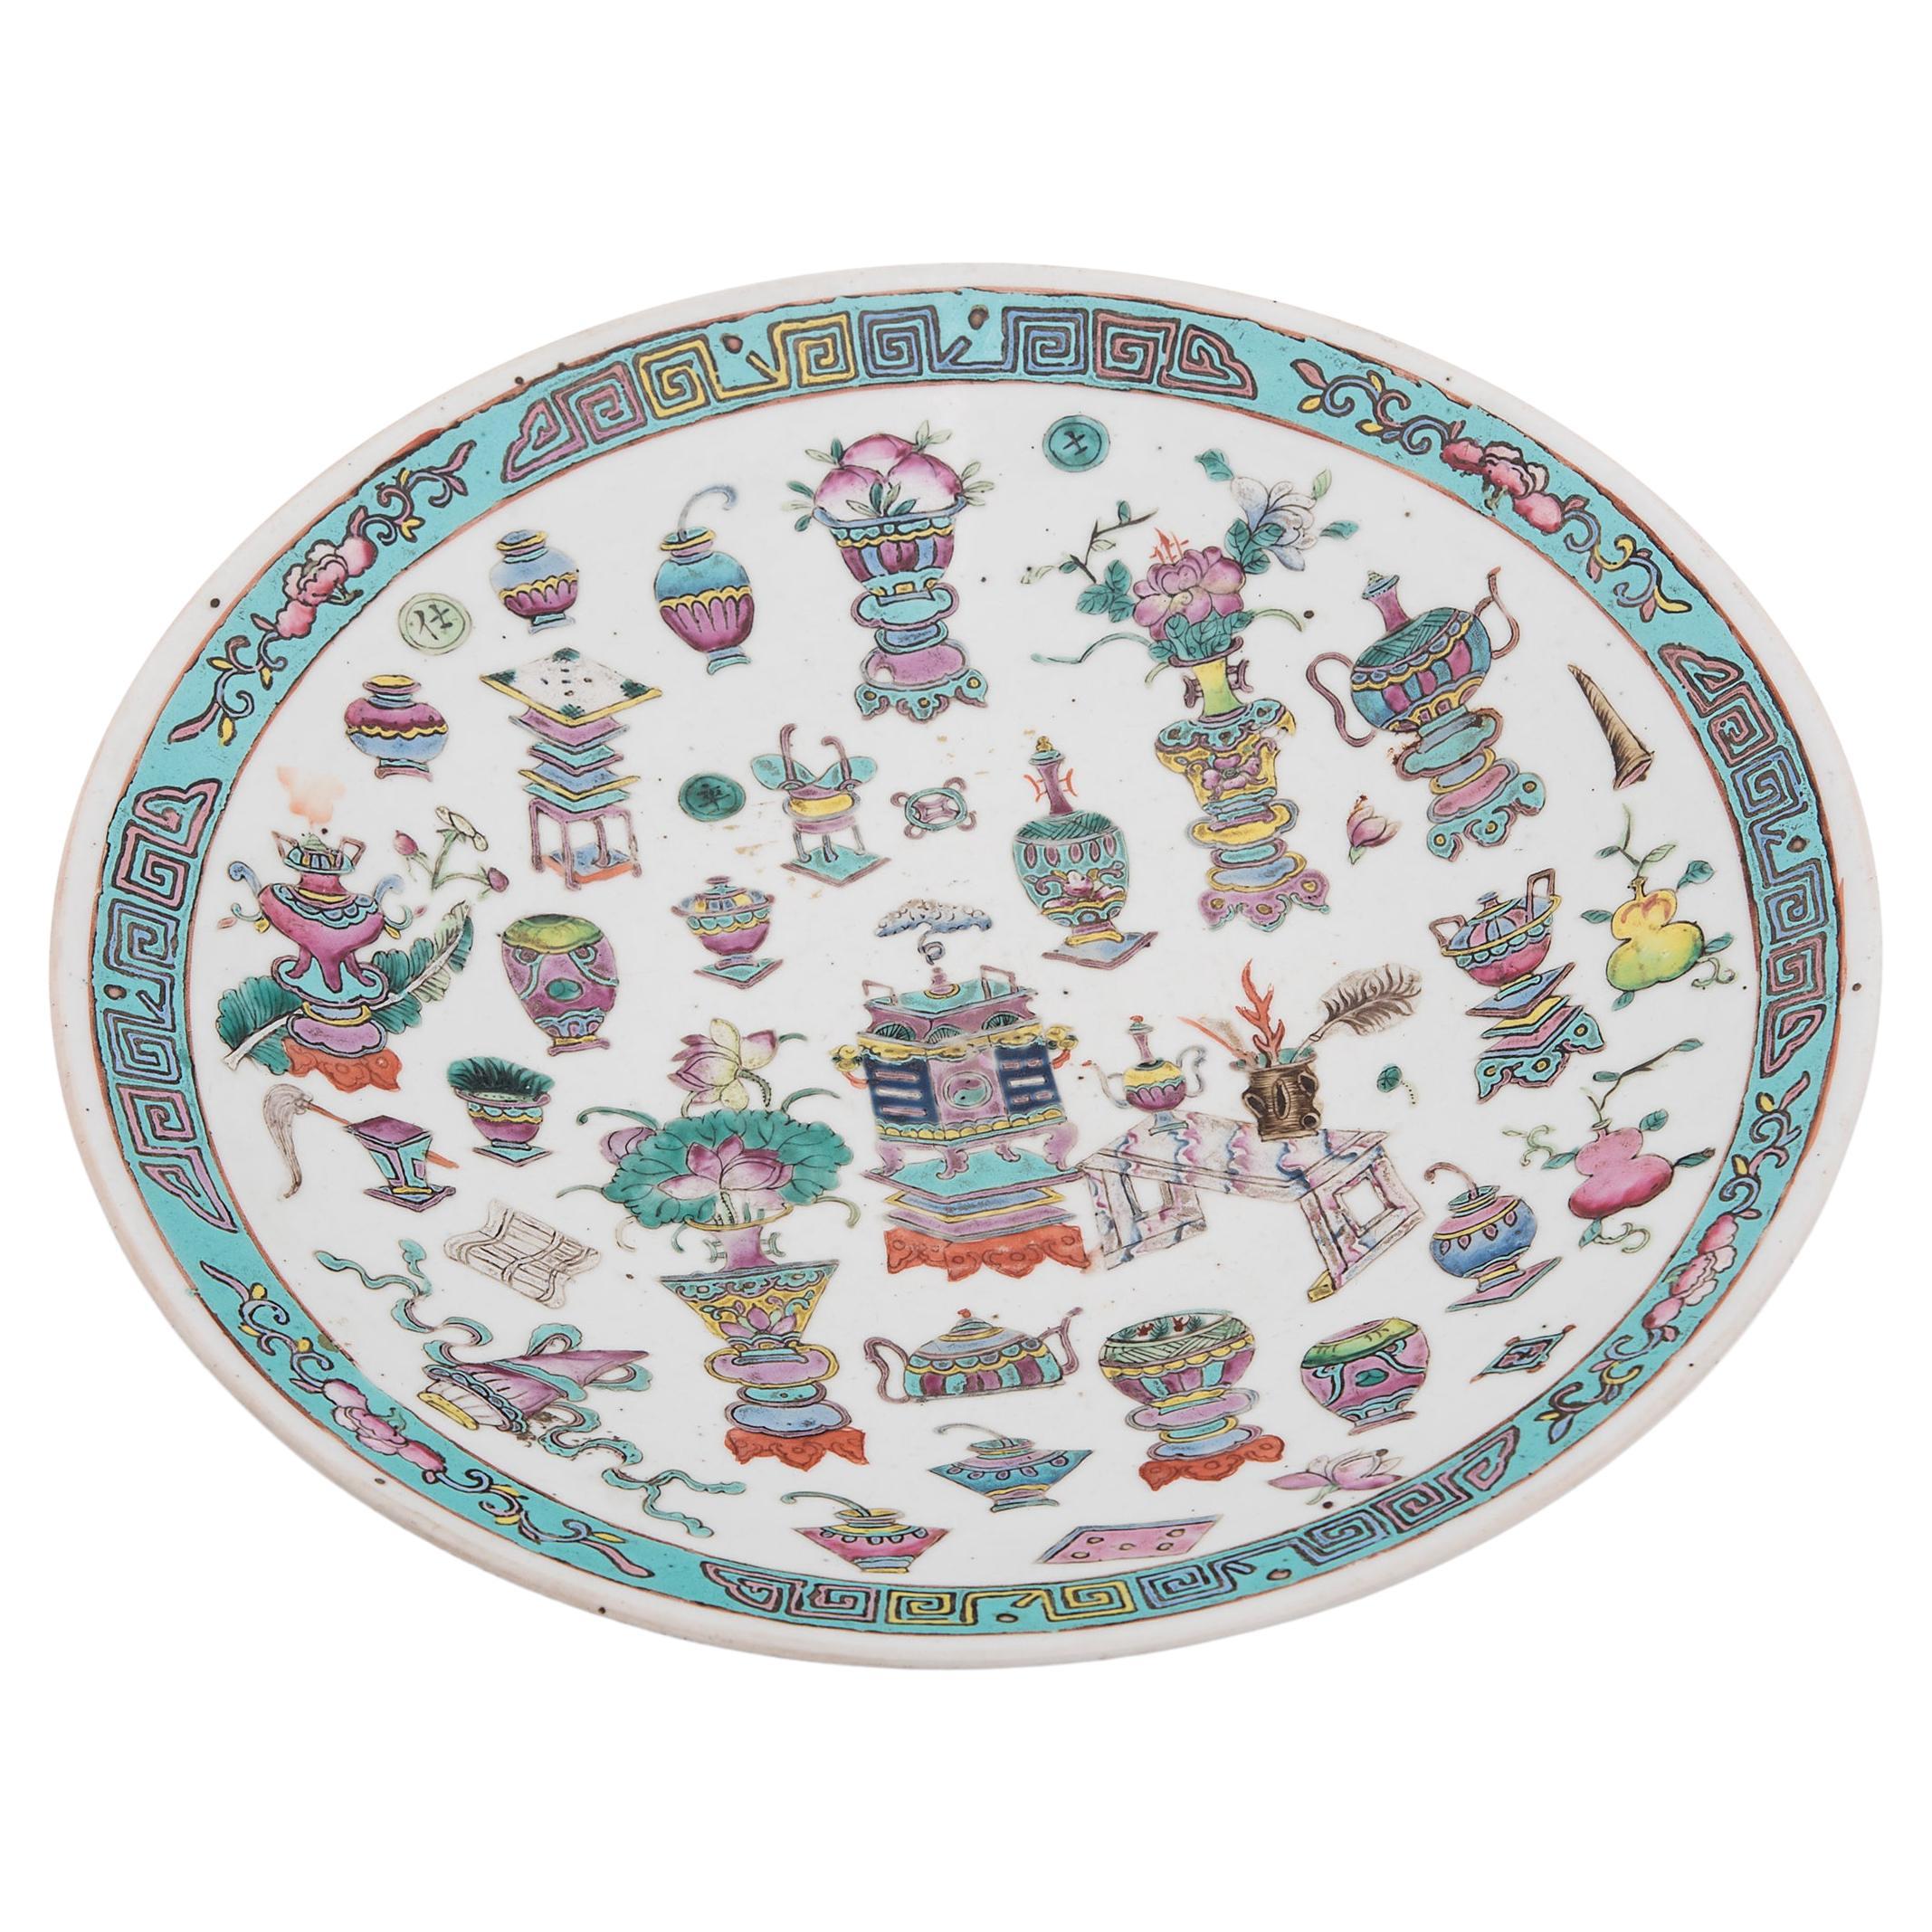 Chinese Famille Rose Dish with Scholars' Objects, c. 1900